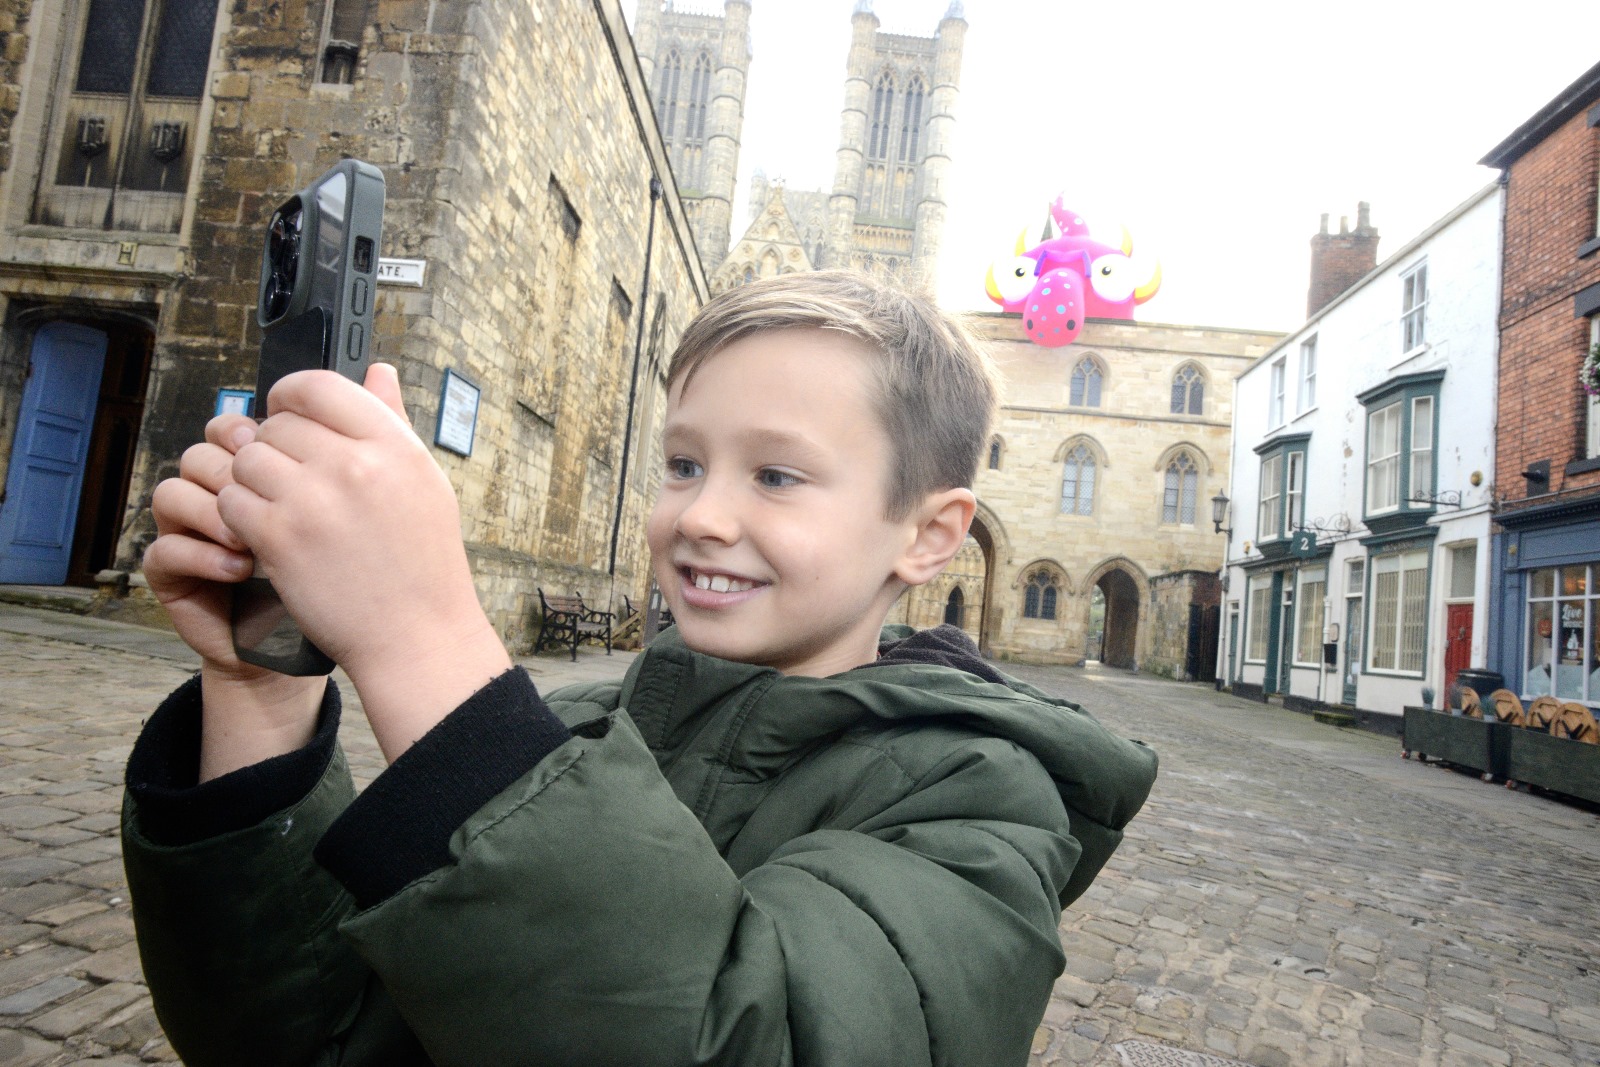 image shows a young boy in front of one of the monsters by the cathedral